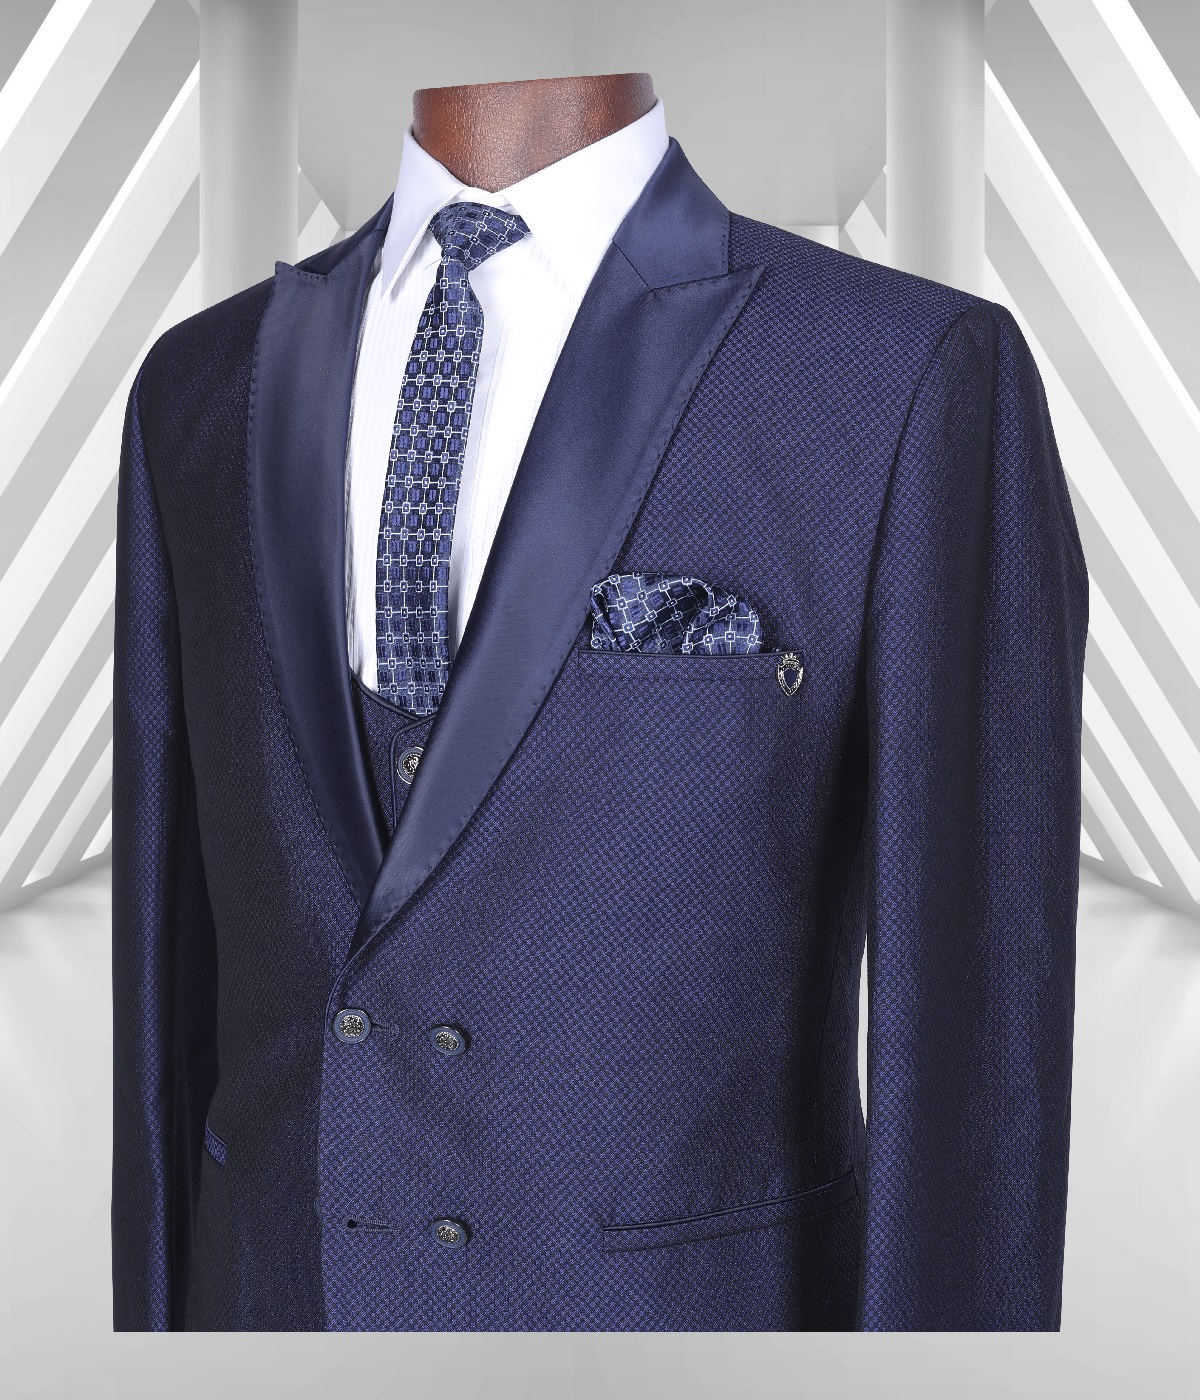 Mens Suits For Summer | JoS. A. Bank